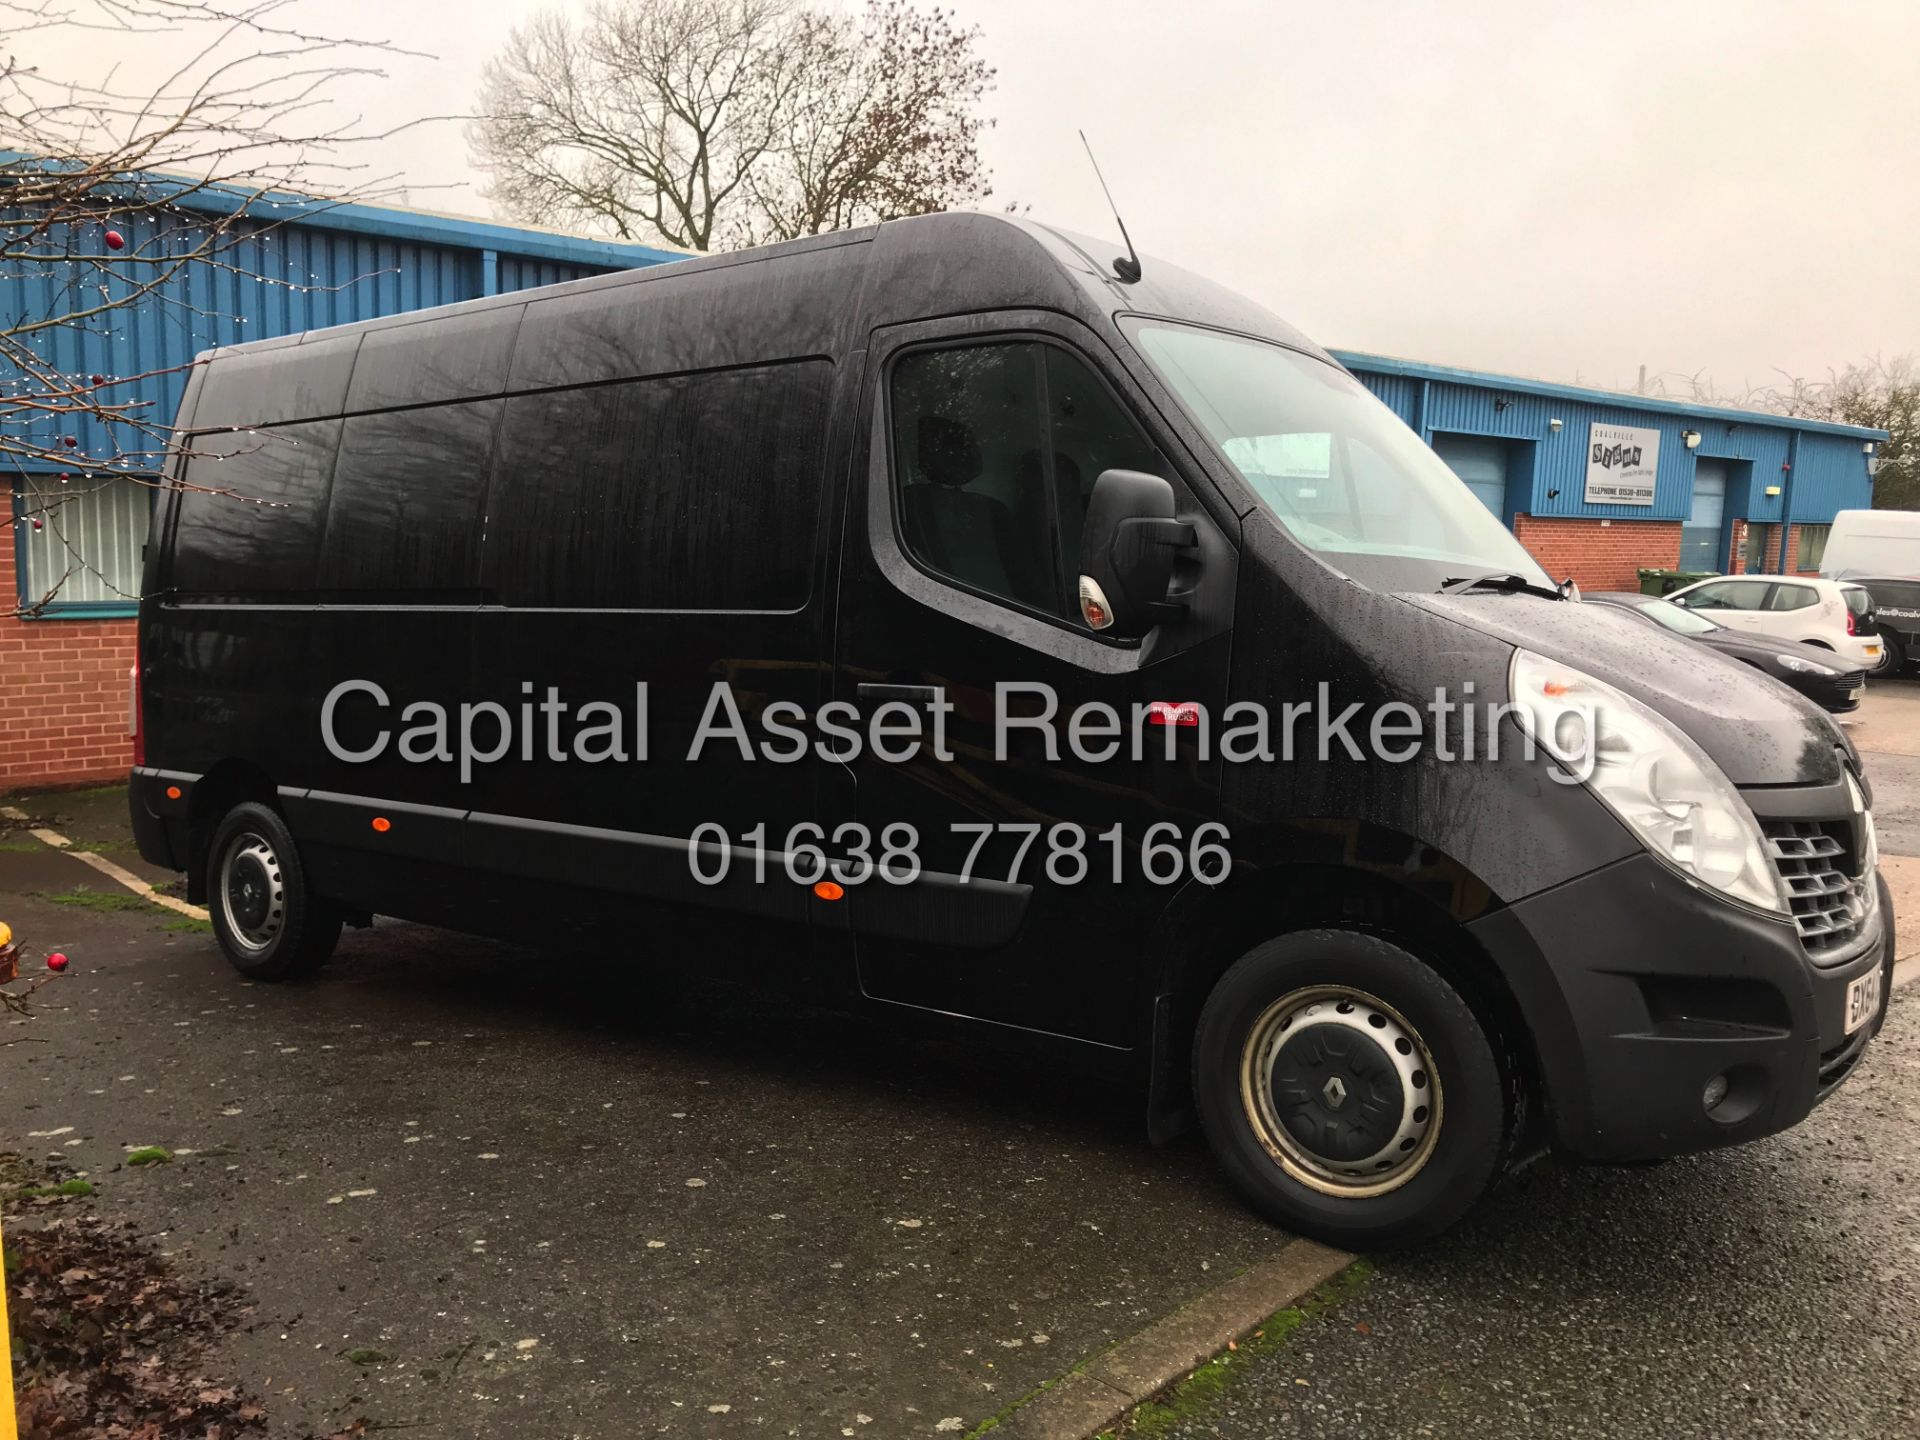 On Sale RENAULT MASTER 2.3DCI LM35 LWB (2015 MODEL) 1 OWNER - AIR CON -ELEC PACK *RARE 165BHP -